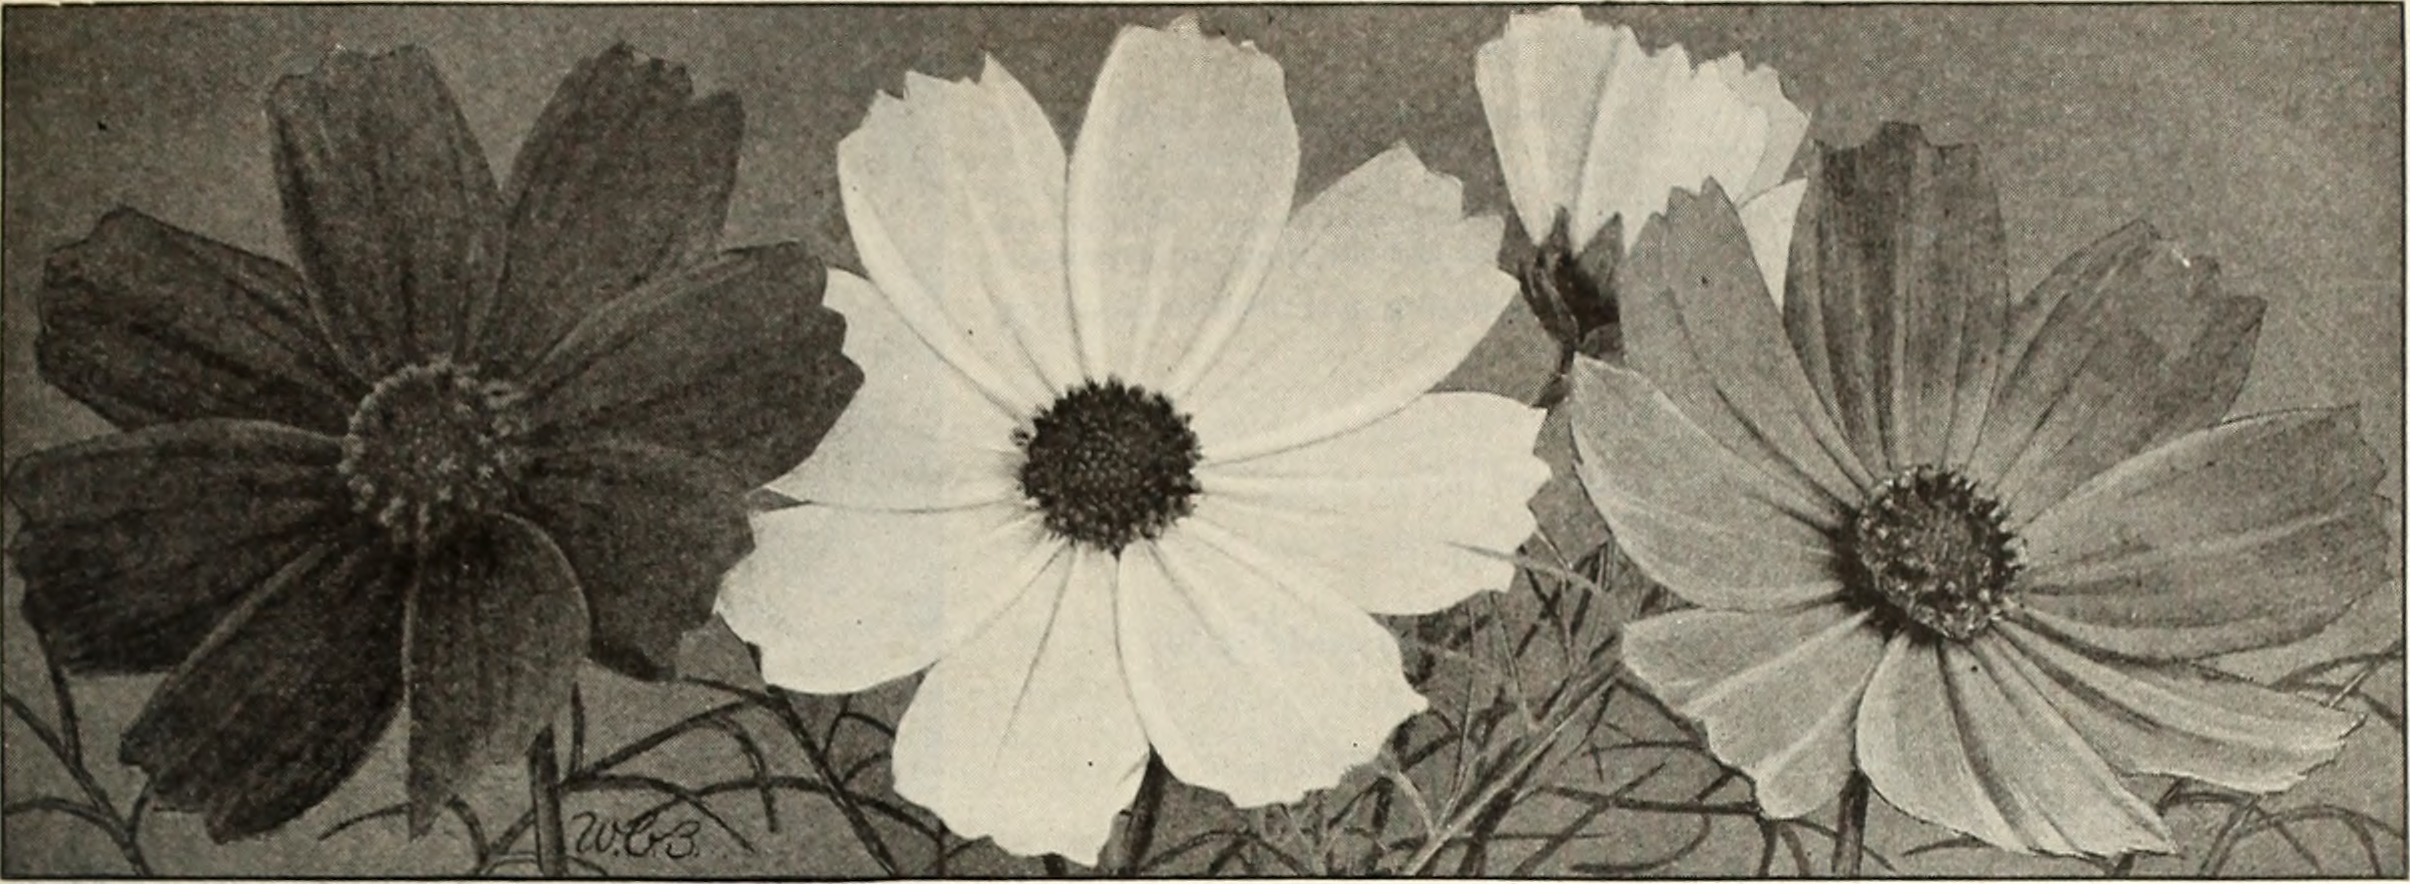 Image from page 48 of "Beckert's seeds" (1922)